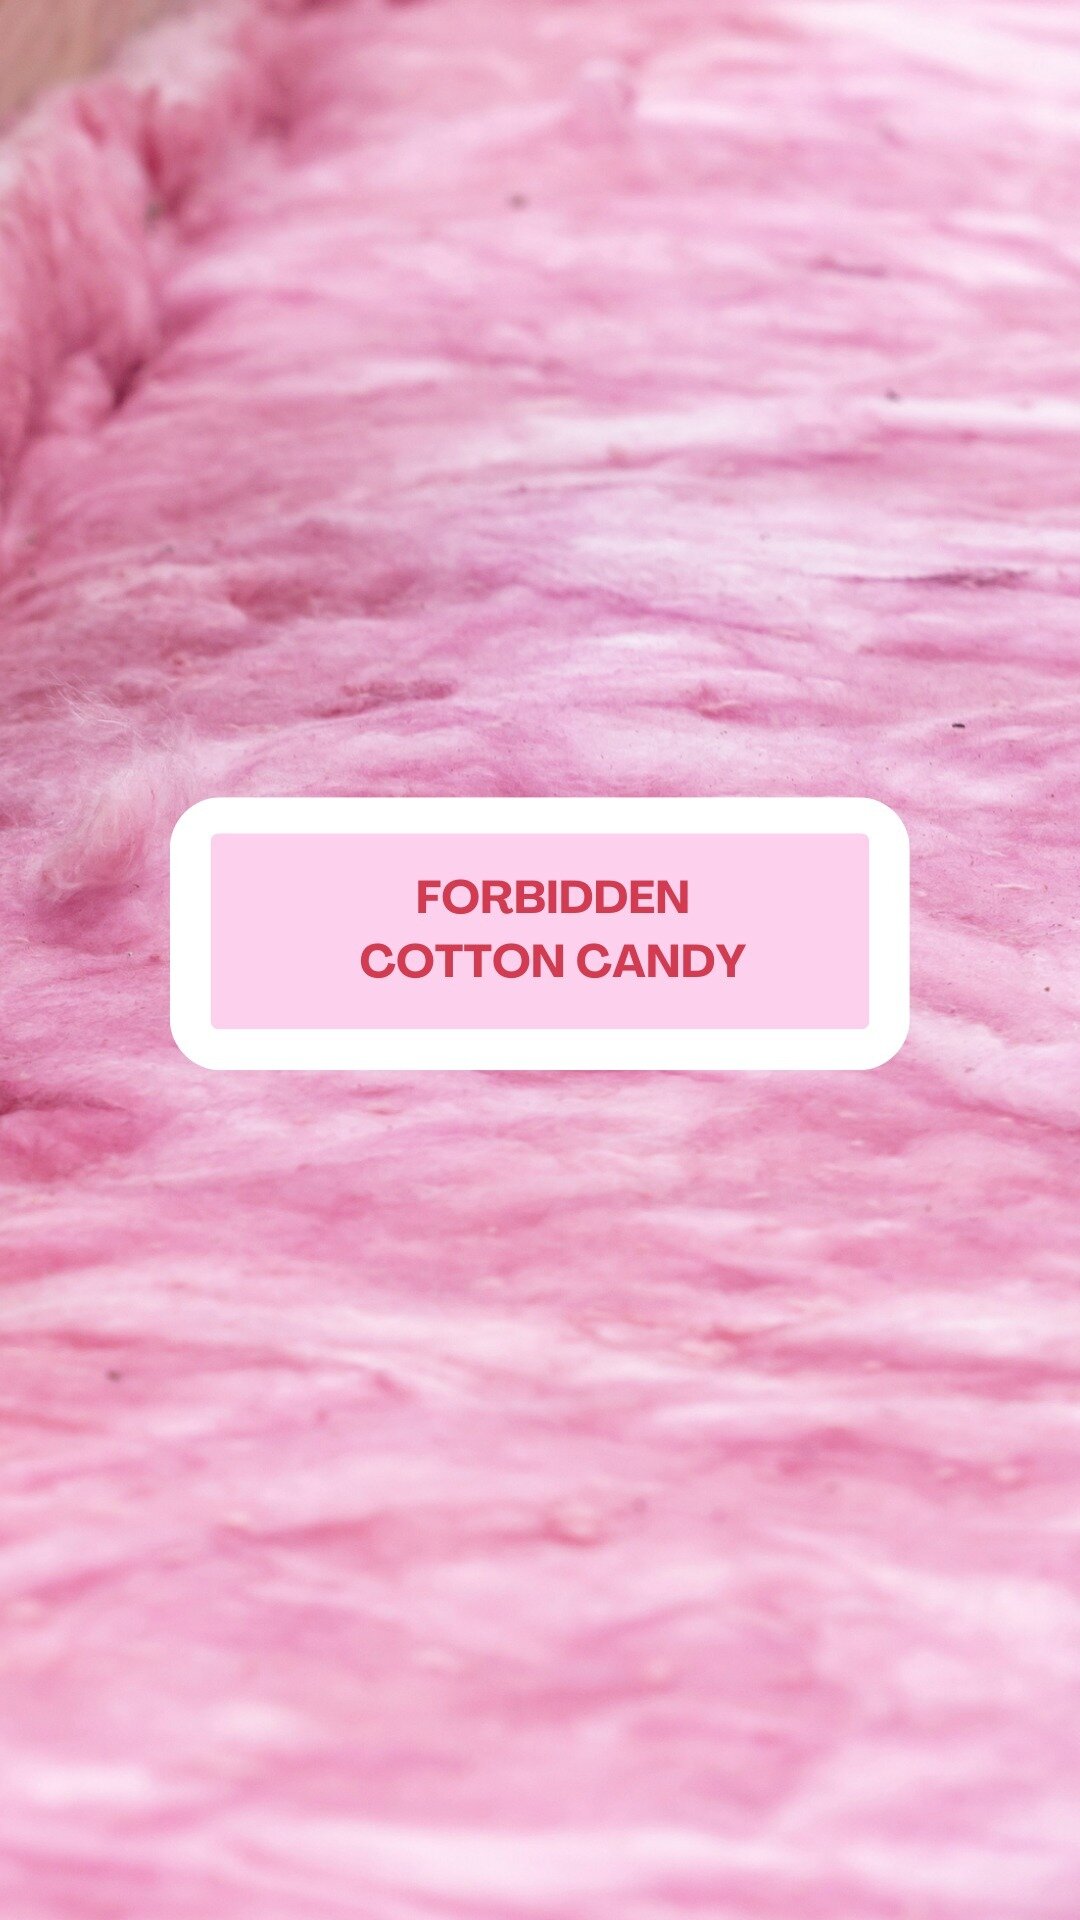 When we were kids, we thought the insulation in our walls was cotton candy. 

Thankfully our parents told us not to take a bite! 

Many of us have never given it a second thought since. But if you are a homeowner, it could be worth your while&hellip;